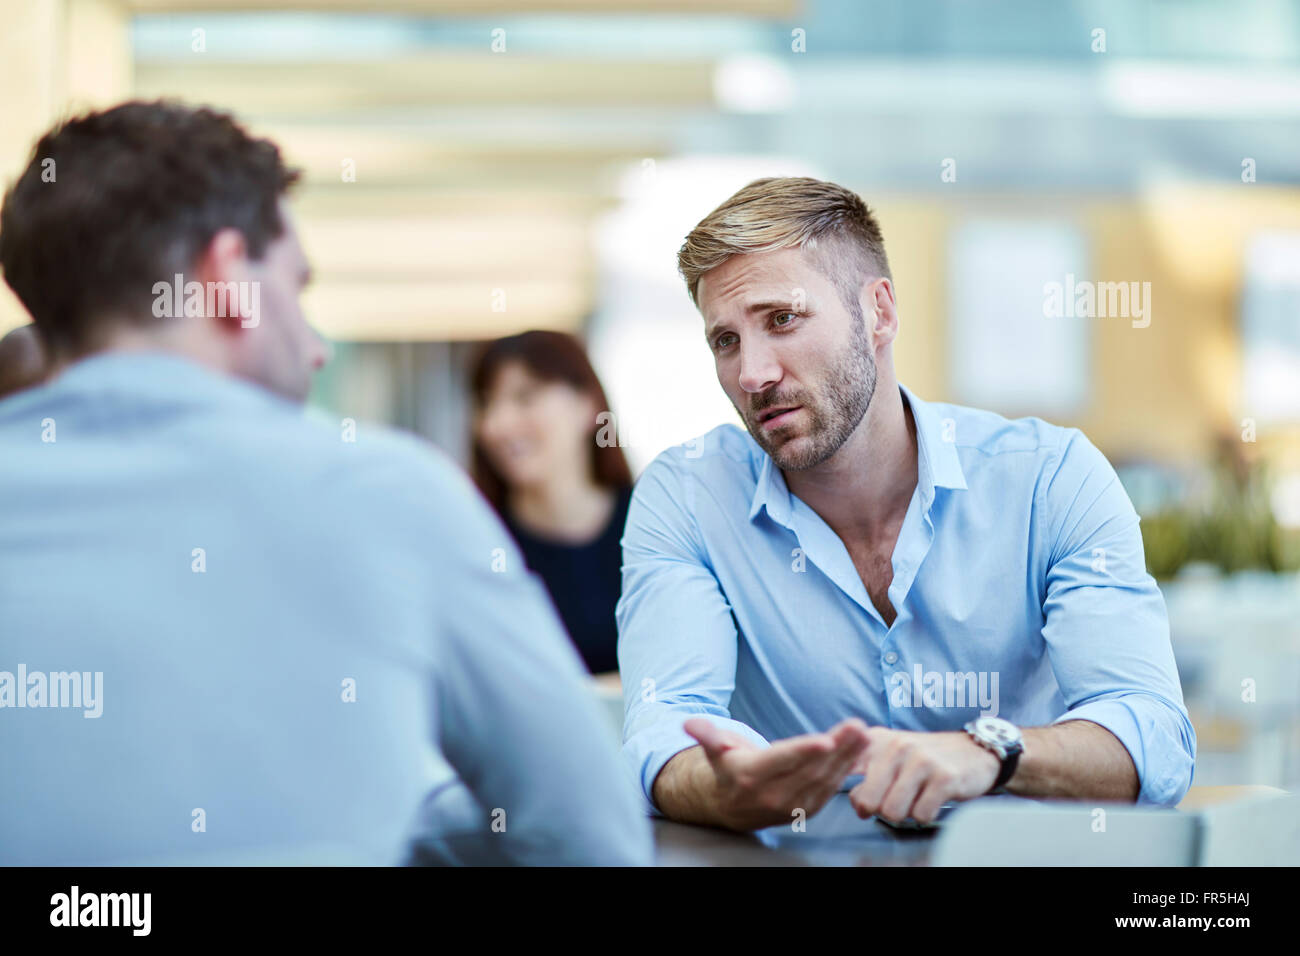 Businessman gesturing and talking to colleague Stock Photo